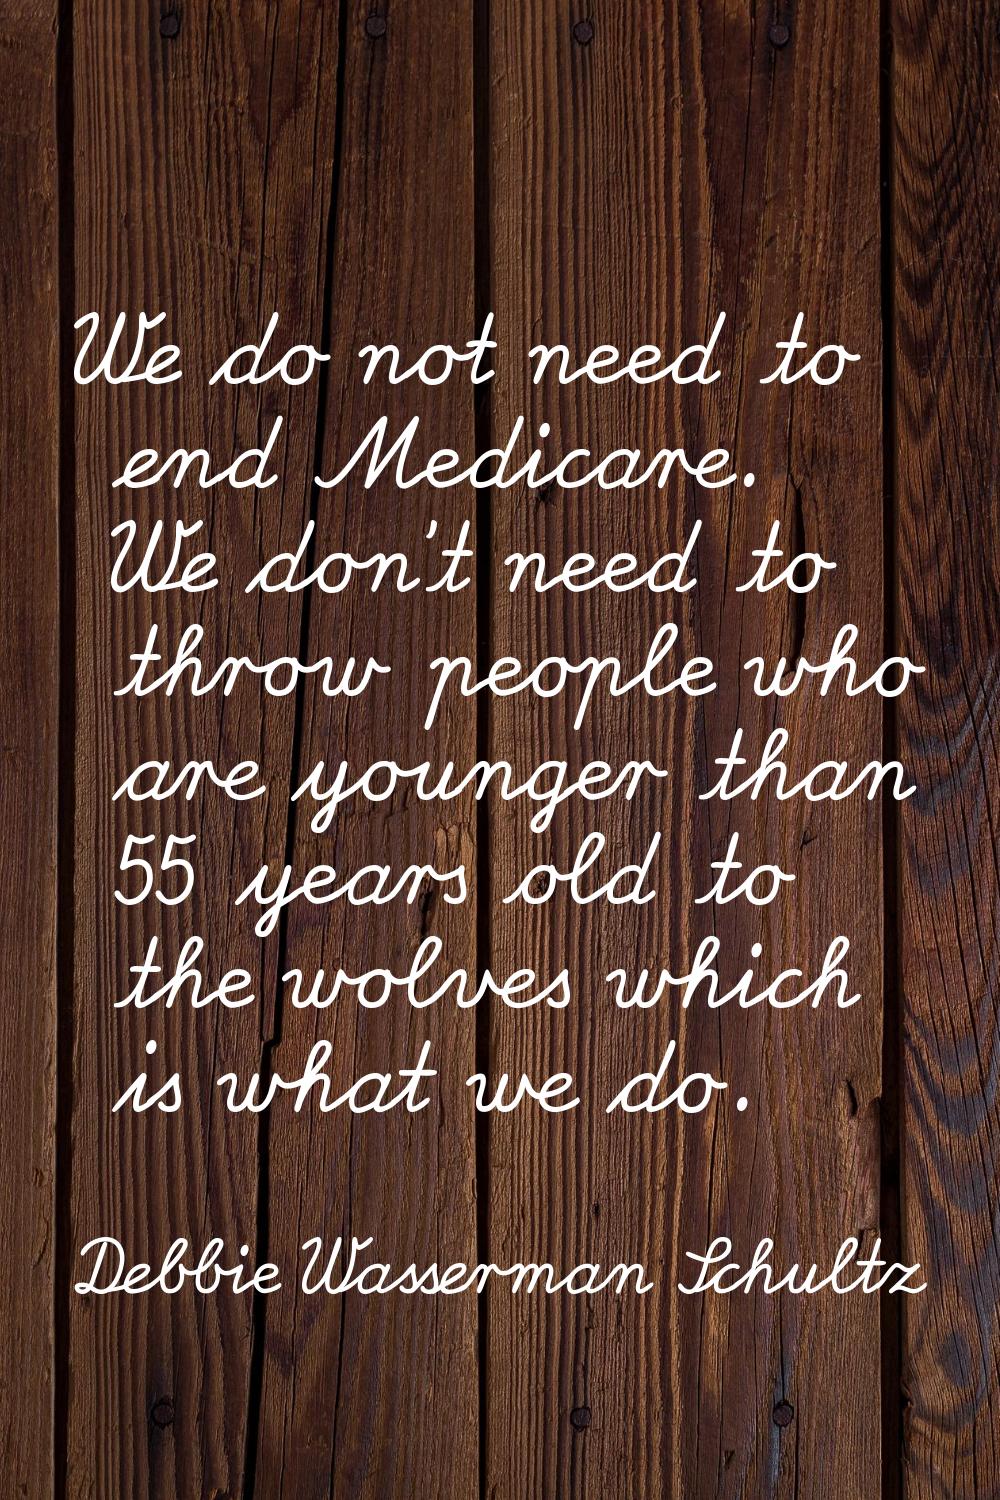 We do not need to end Medicare. We don't need to throw people who are younger than 55 years old to 